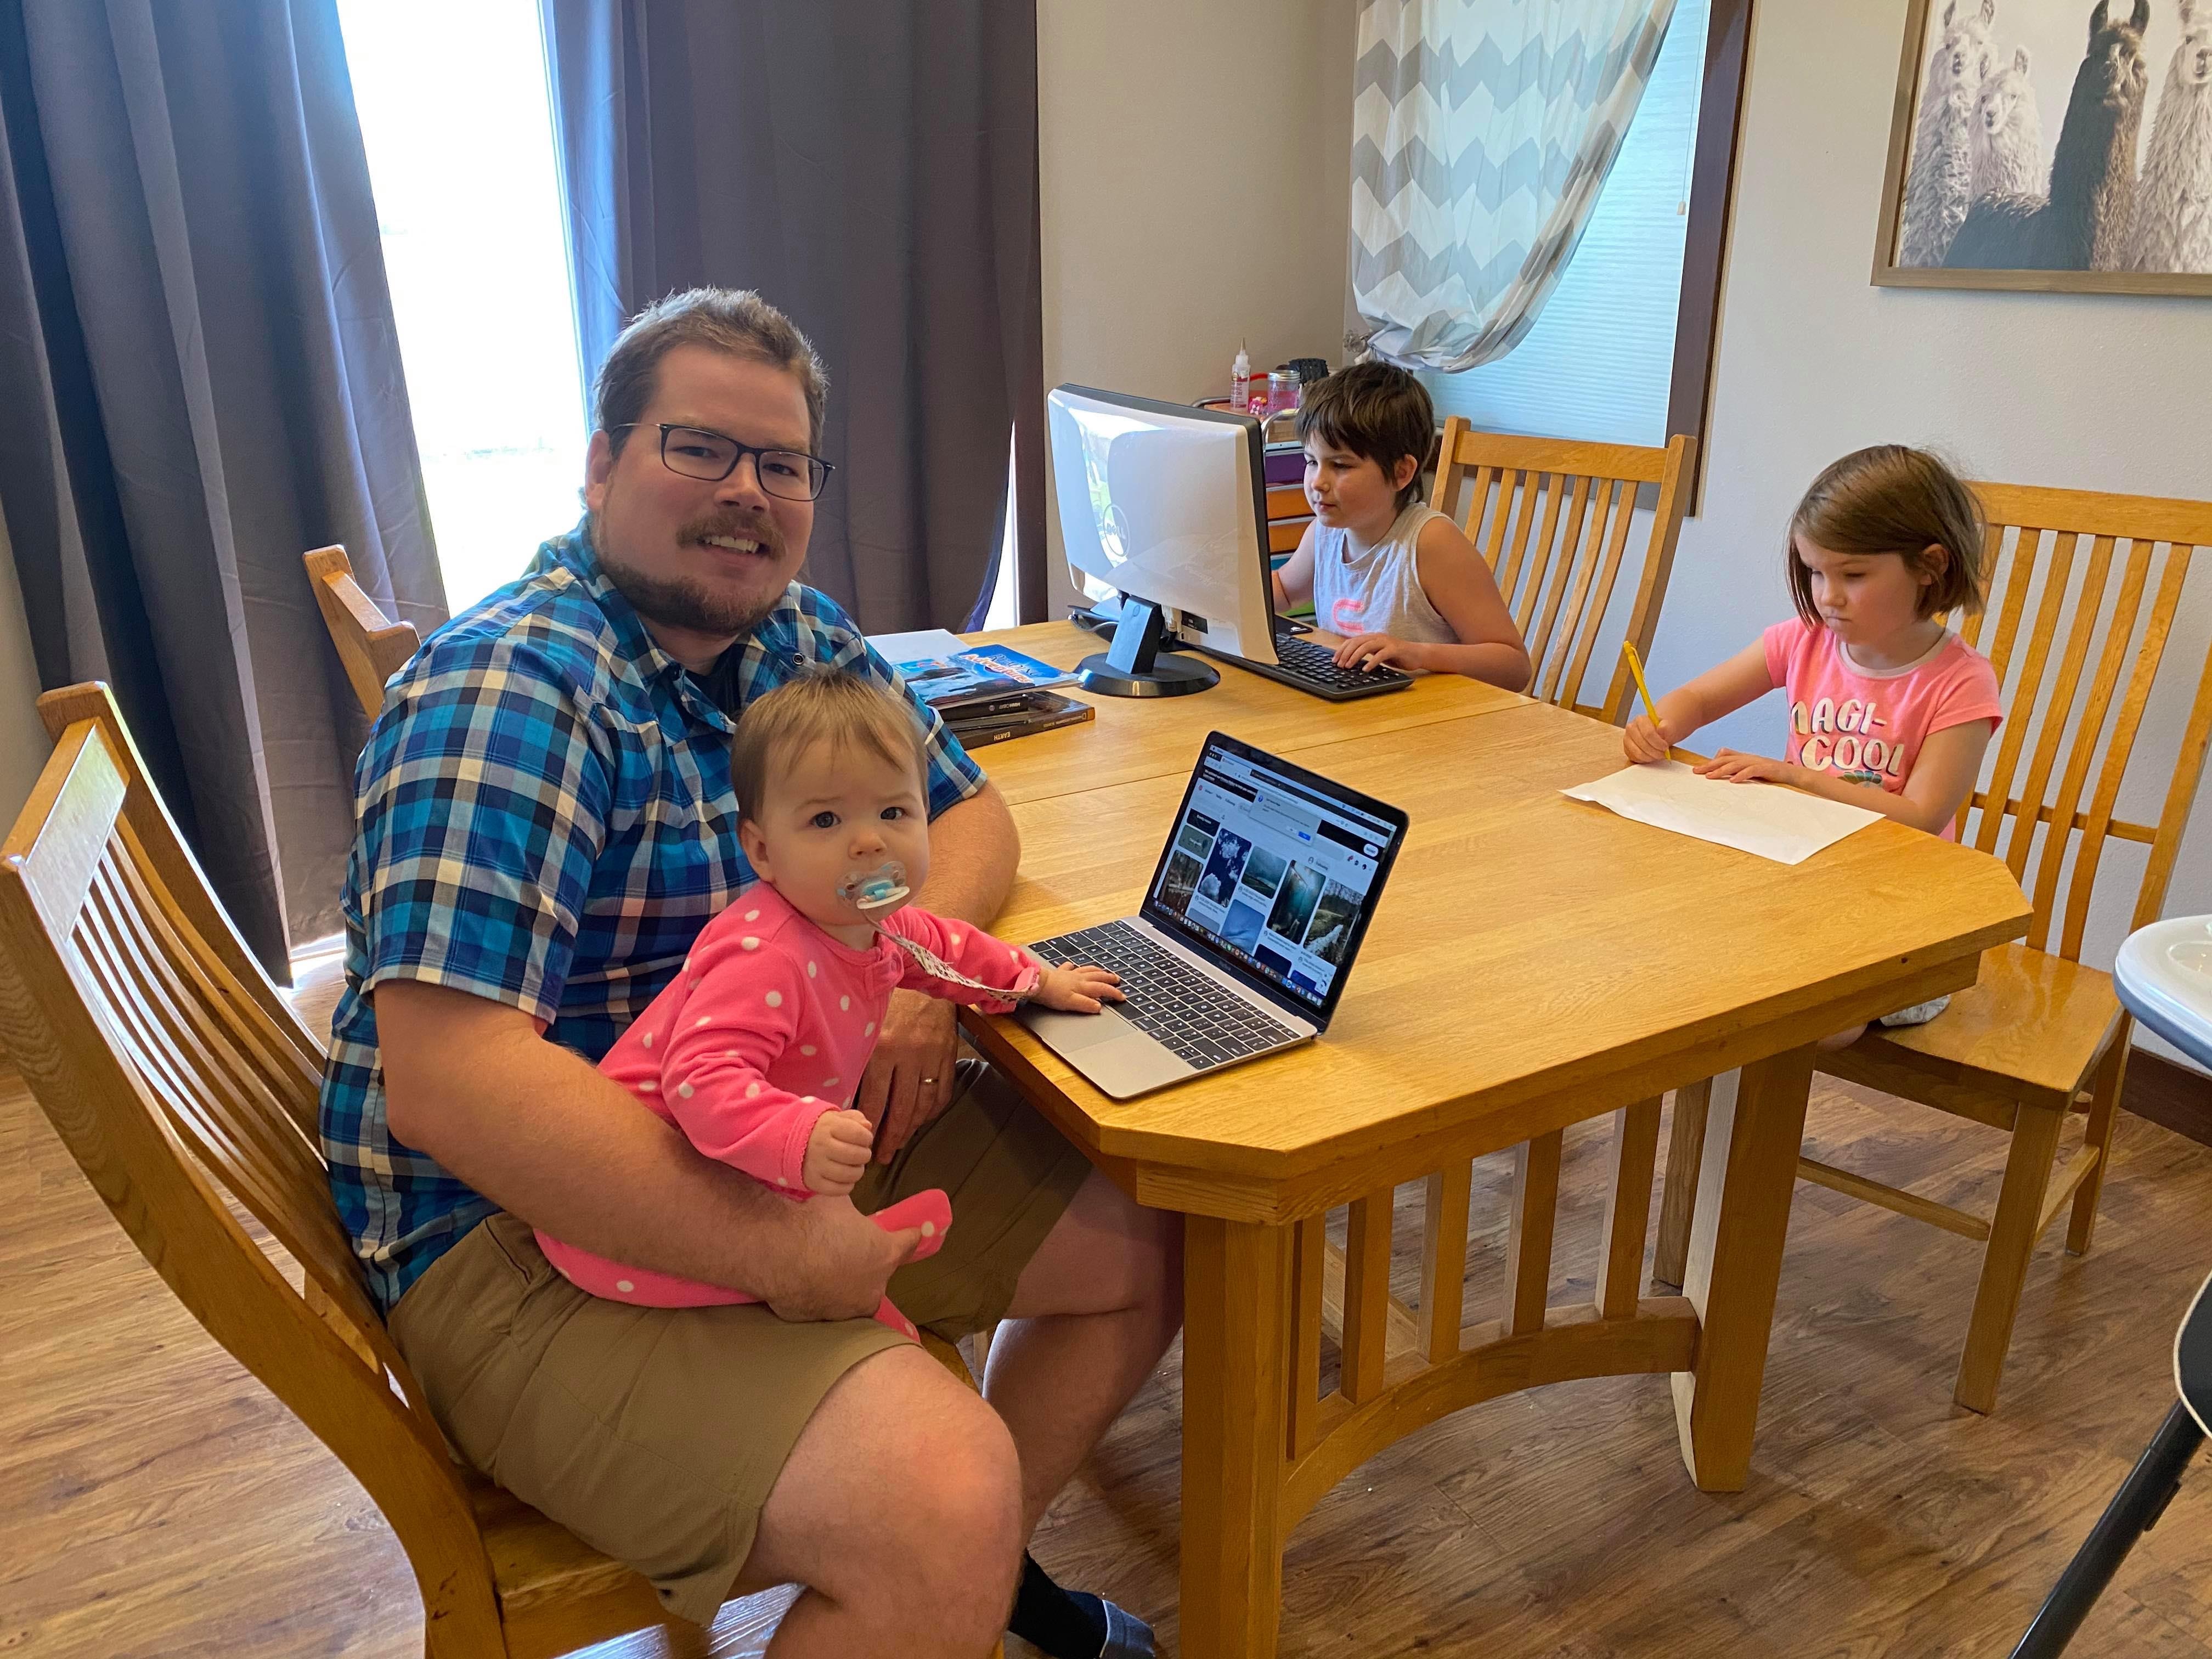 Kennedy at home in Grand Forks, North Dakota, with daughters Juniper (on his lap), Zoey), and Carter (with pencil and paper).